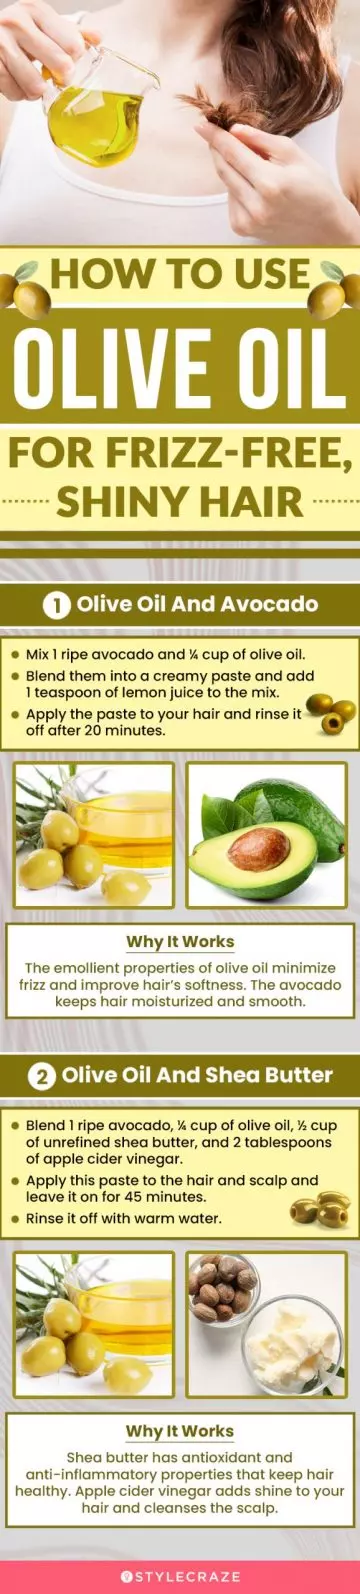 olive oil for frizz free and shiny hair (infographic)